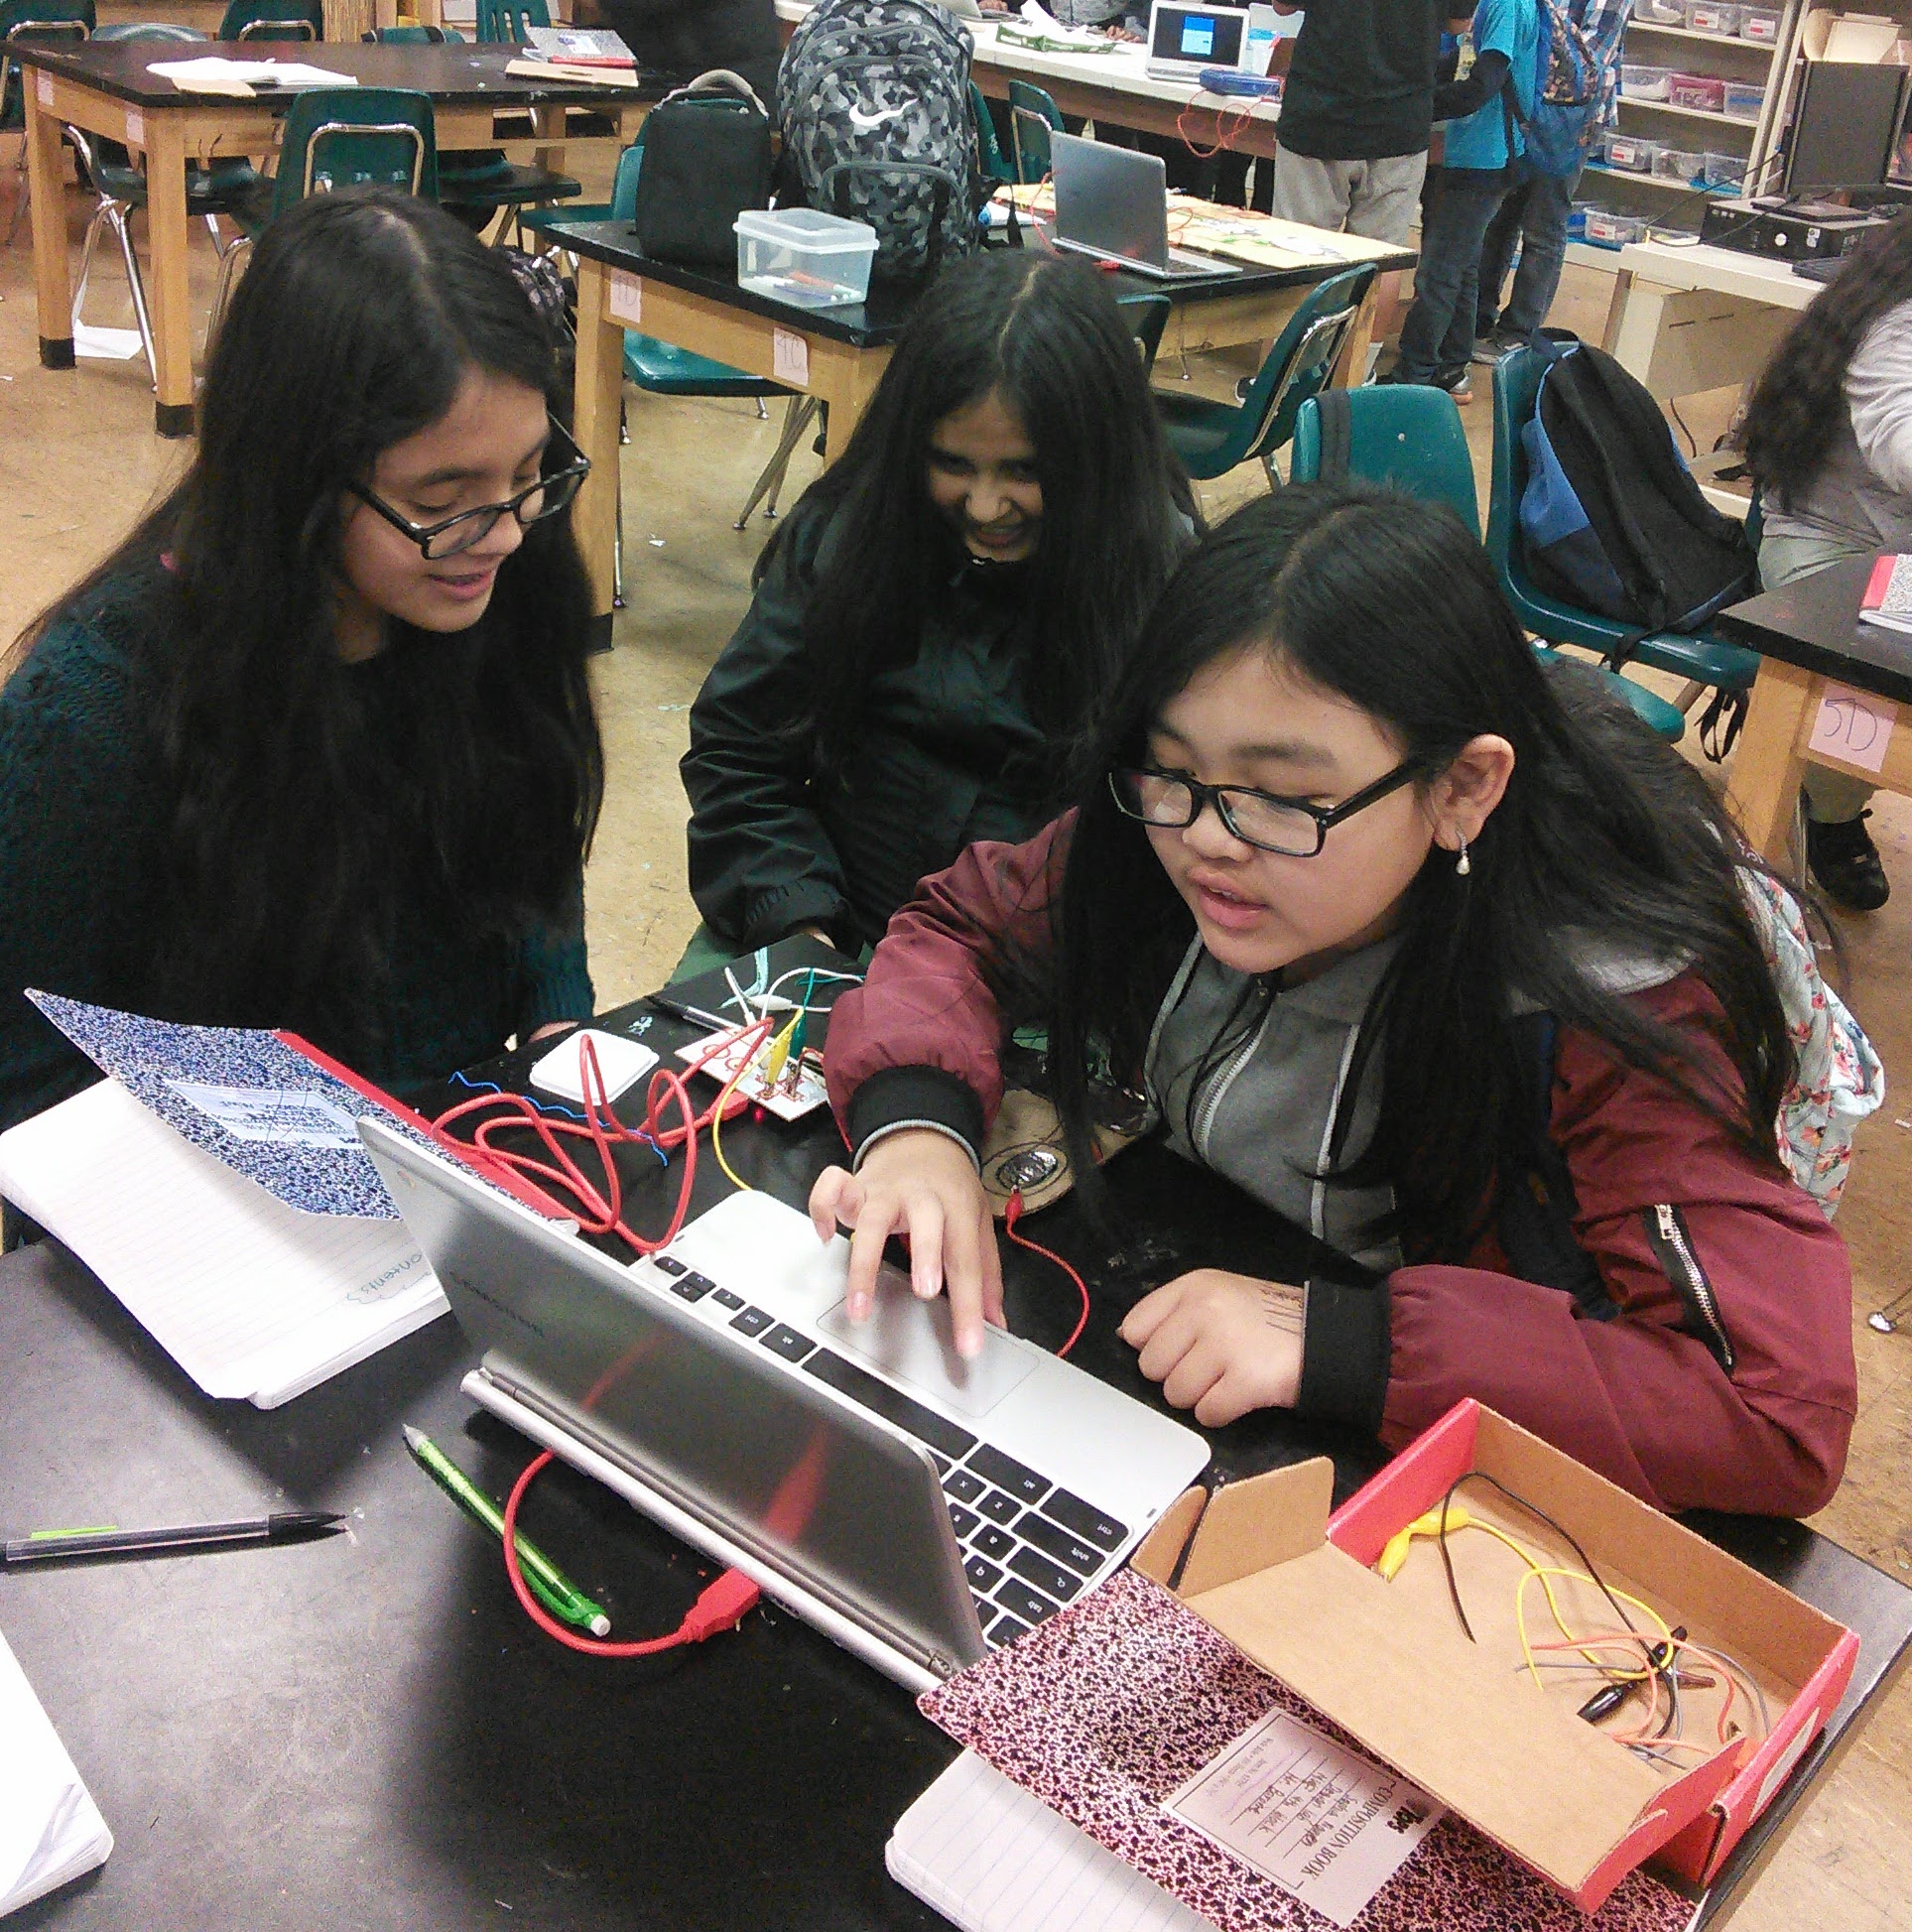 Students working in the CREATE Studio at Roosevelt Middle School in Oakland, CA